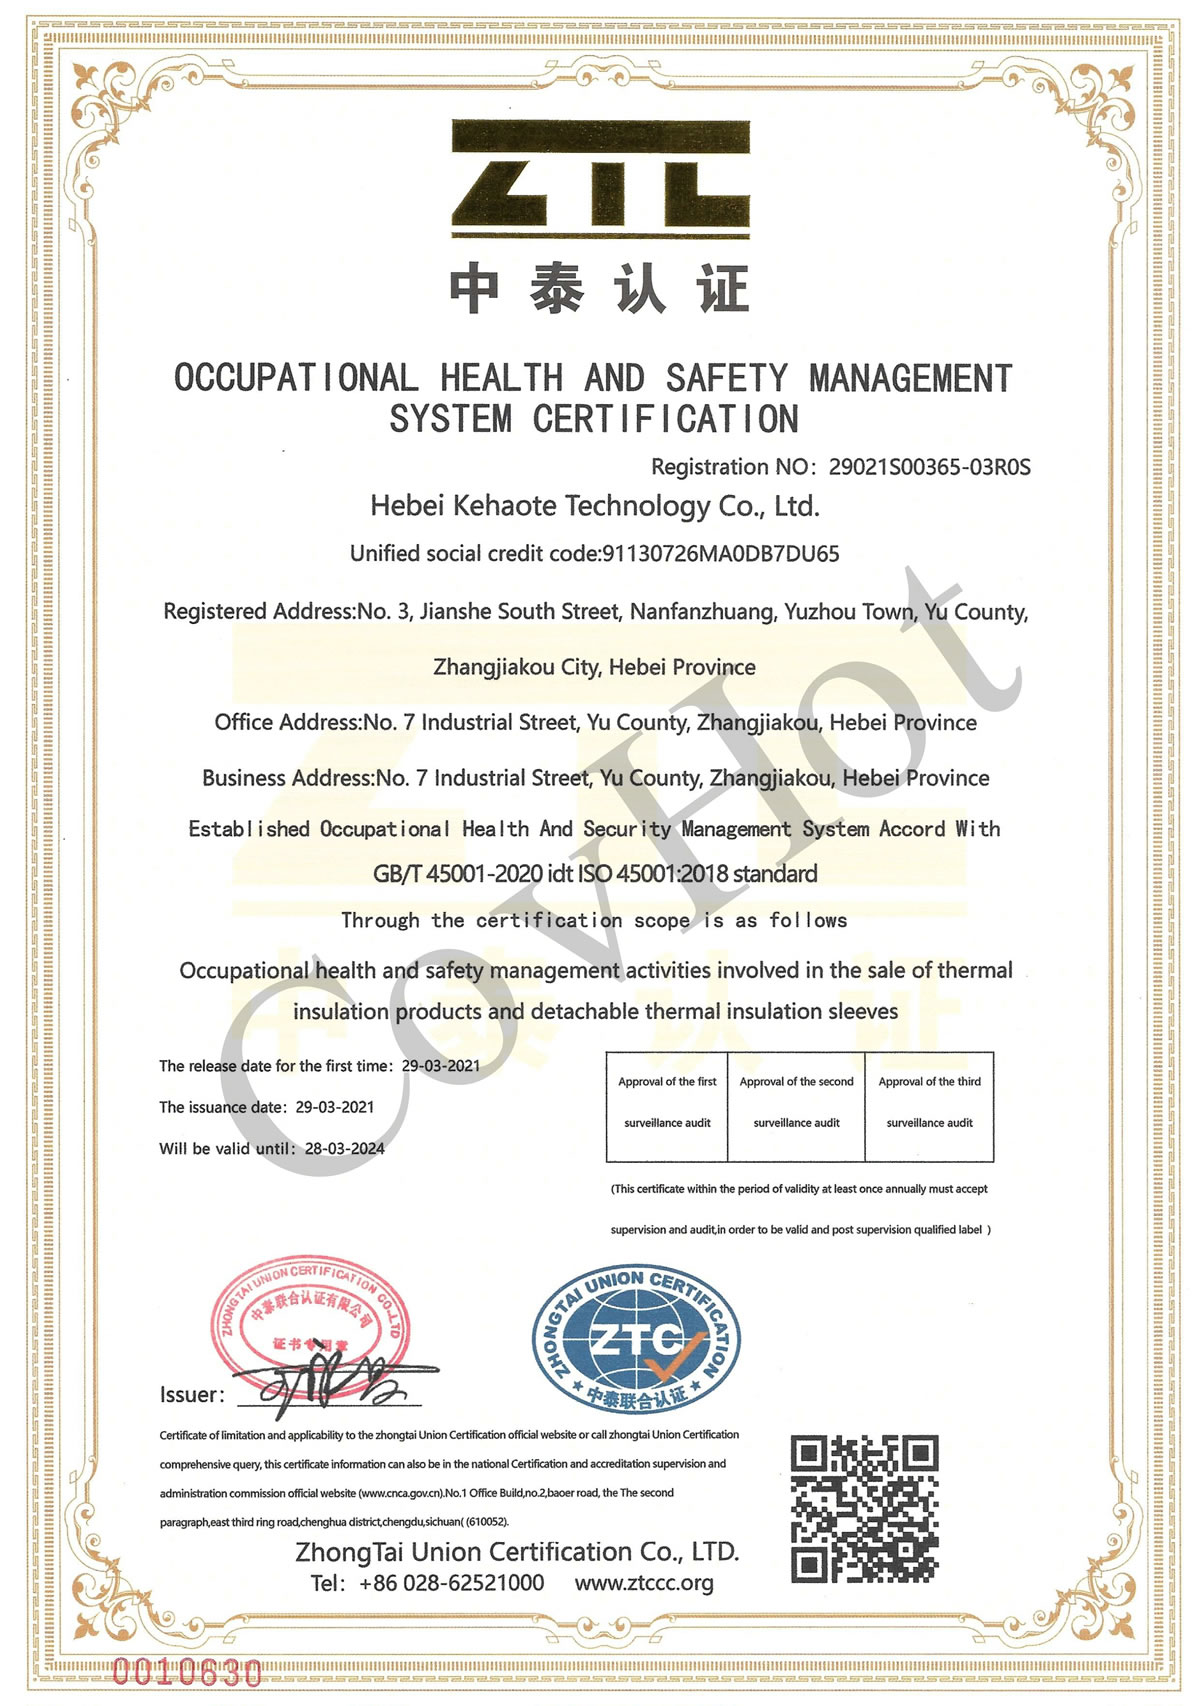 ISO 45001 occupation heath and safety management system certification